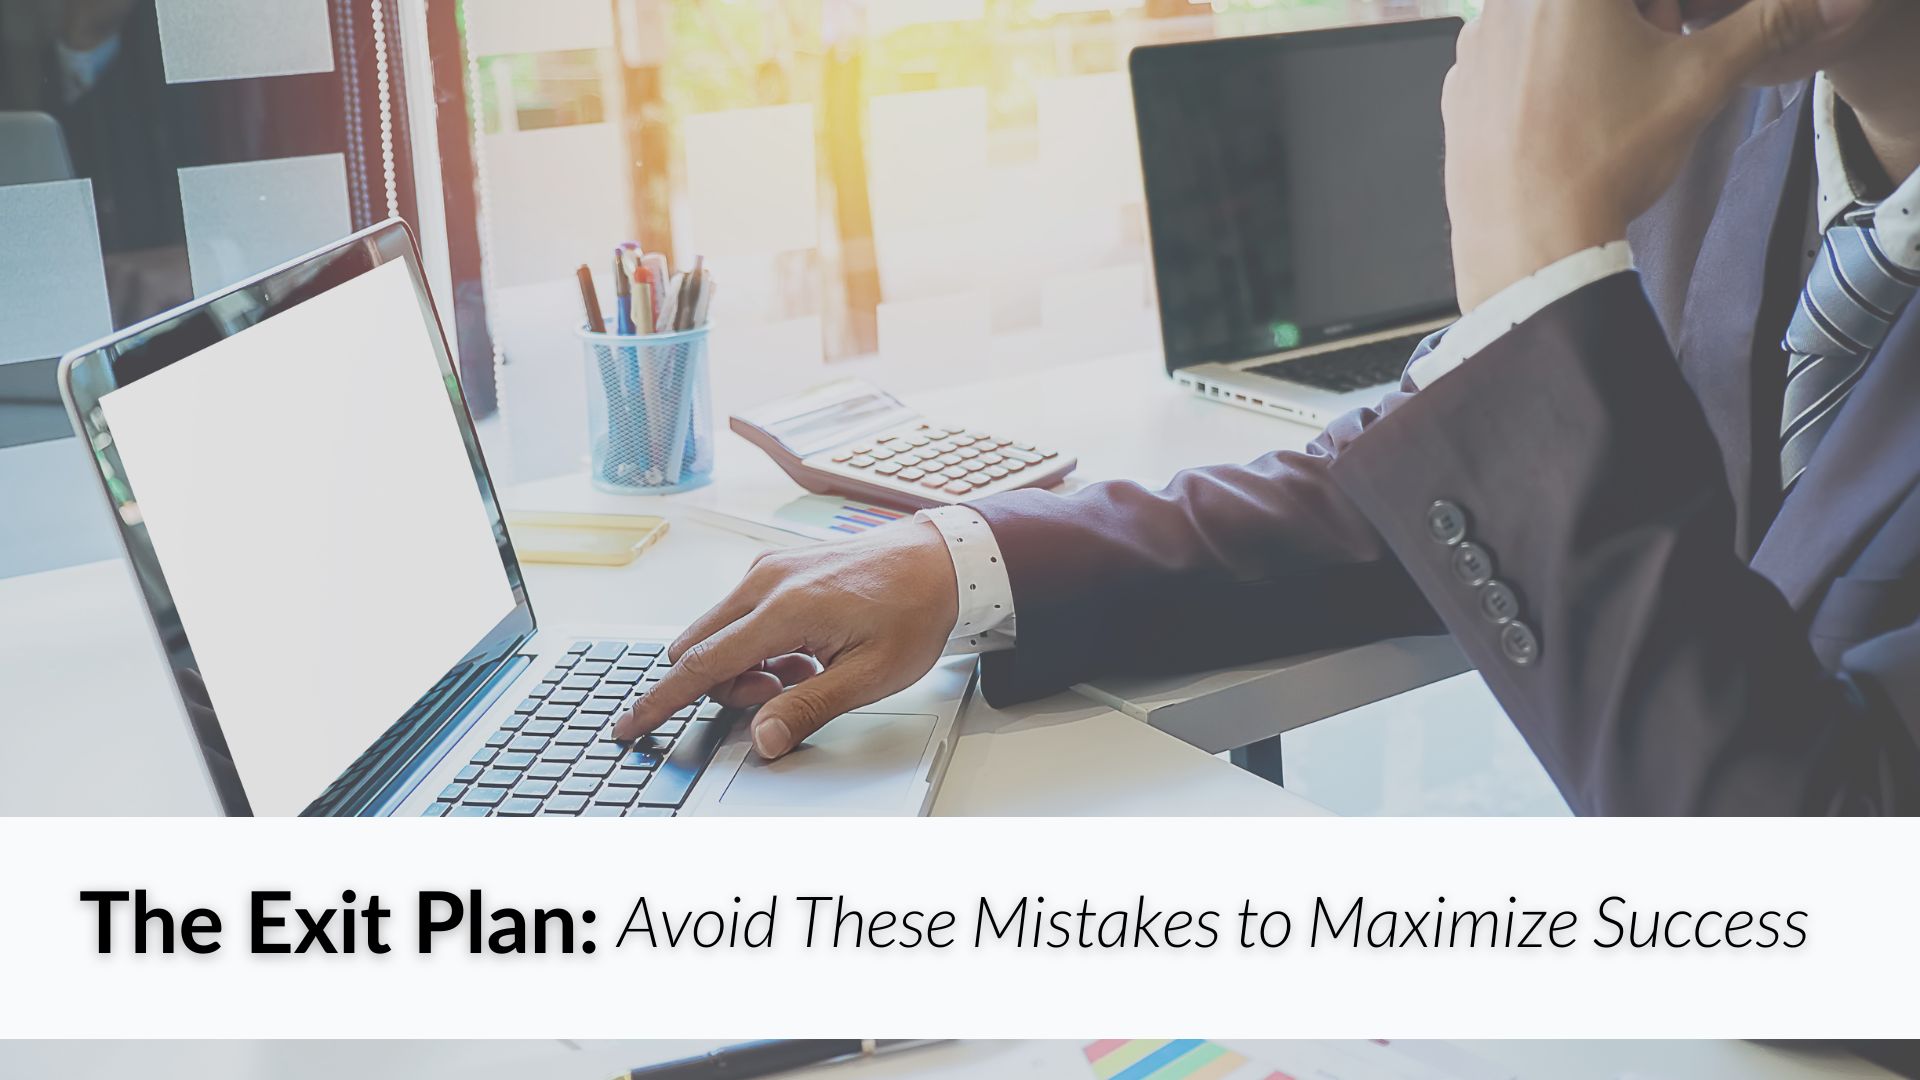 The Exit Plan: Avoid These Mistakes to Maximize Success